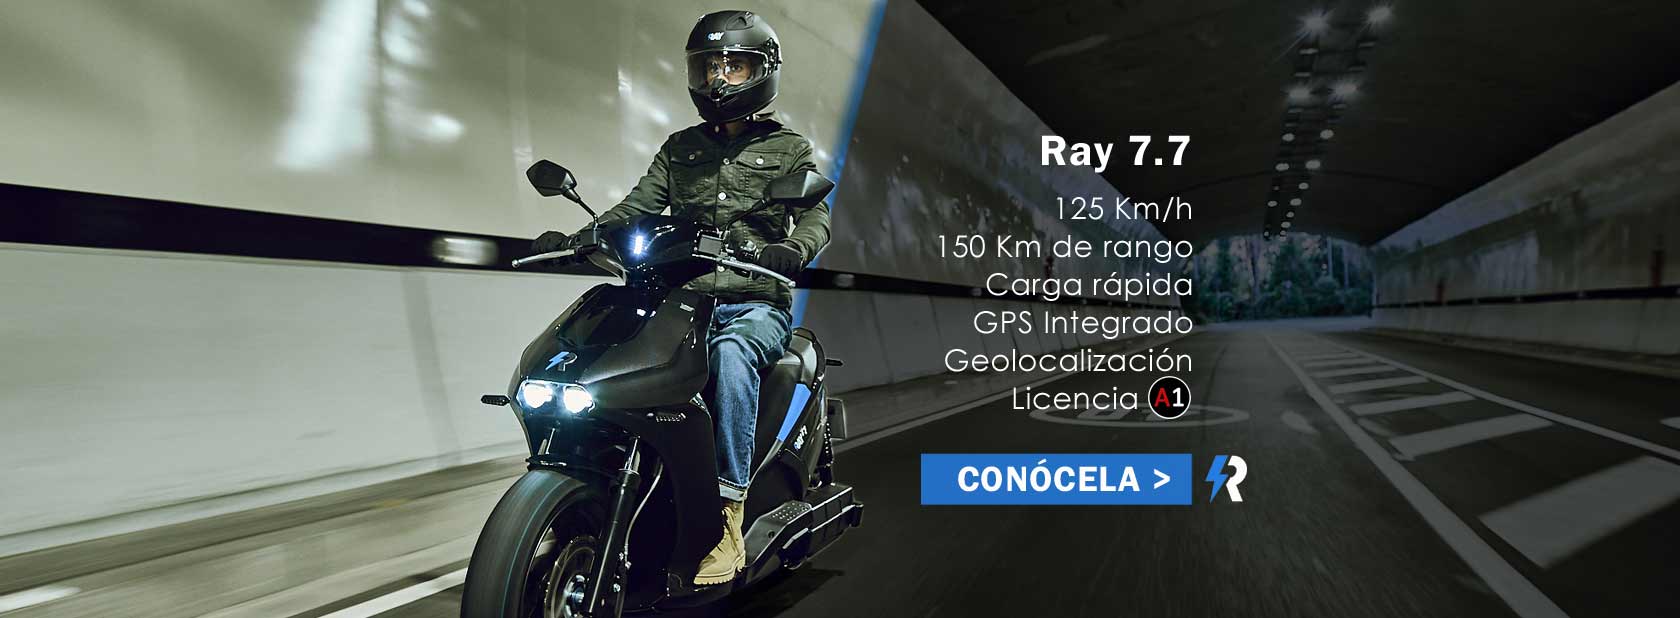 Conoce-Scooter-Electrico-Ray-